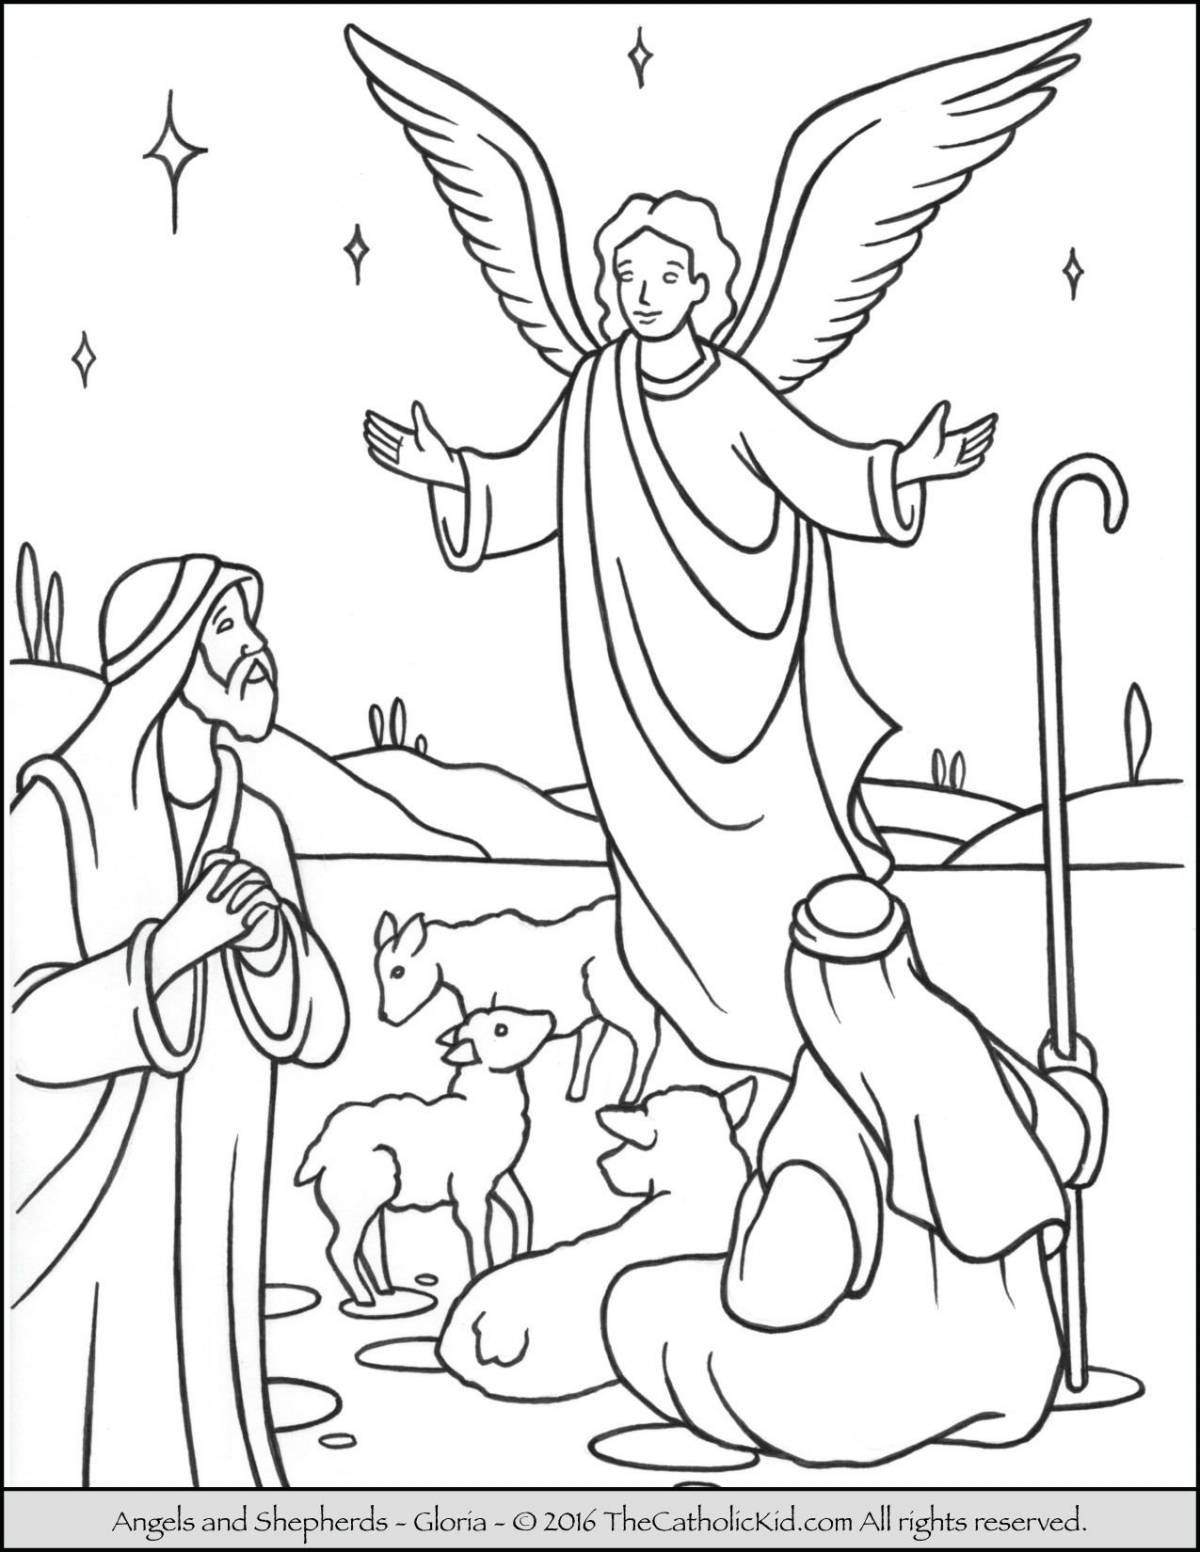 Live Christmas coloring book for kids